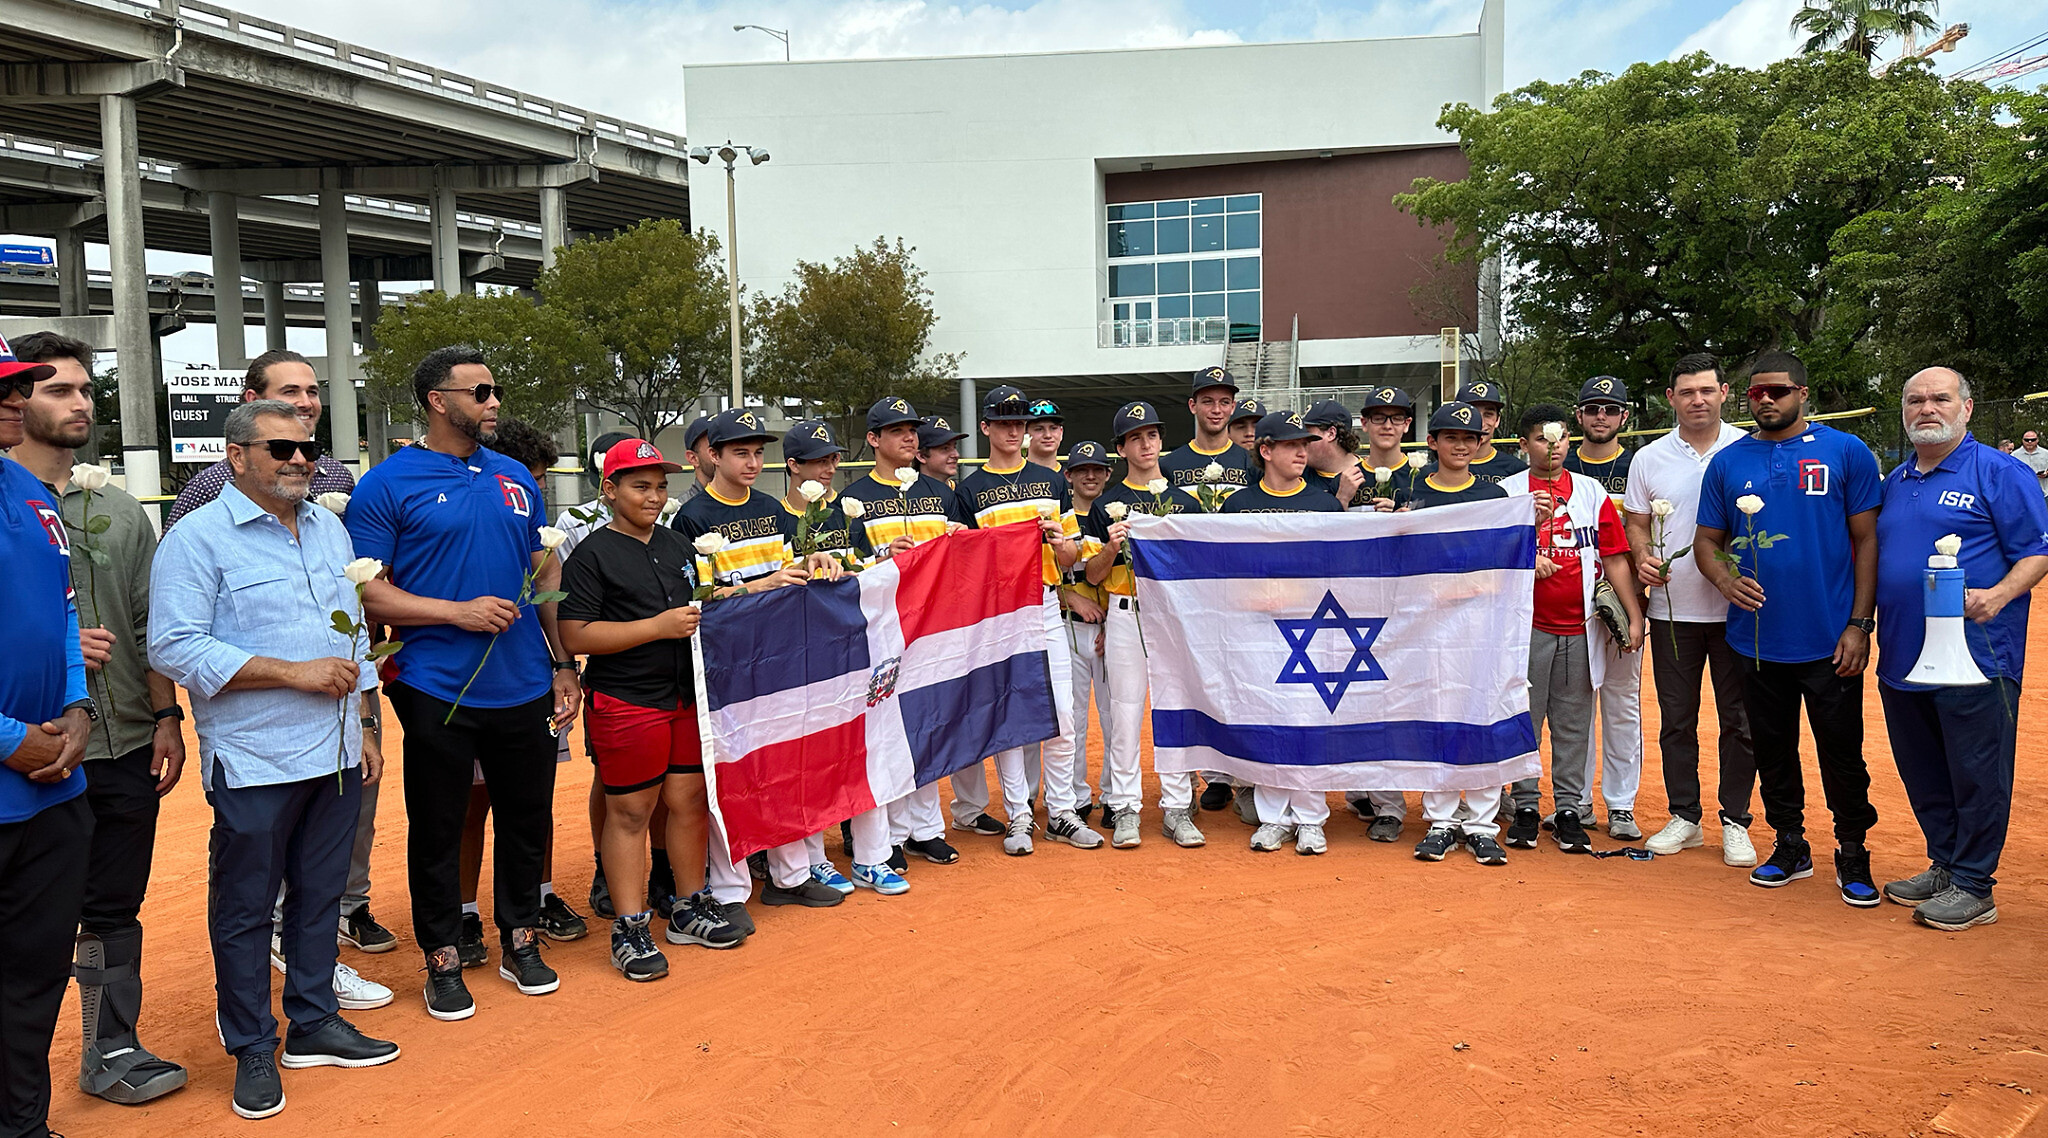 Israeli, Dominican teams gather to promote friendship at World Baseball  Classic